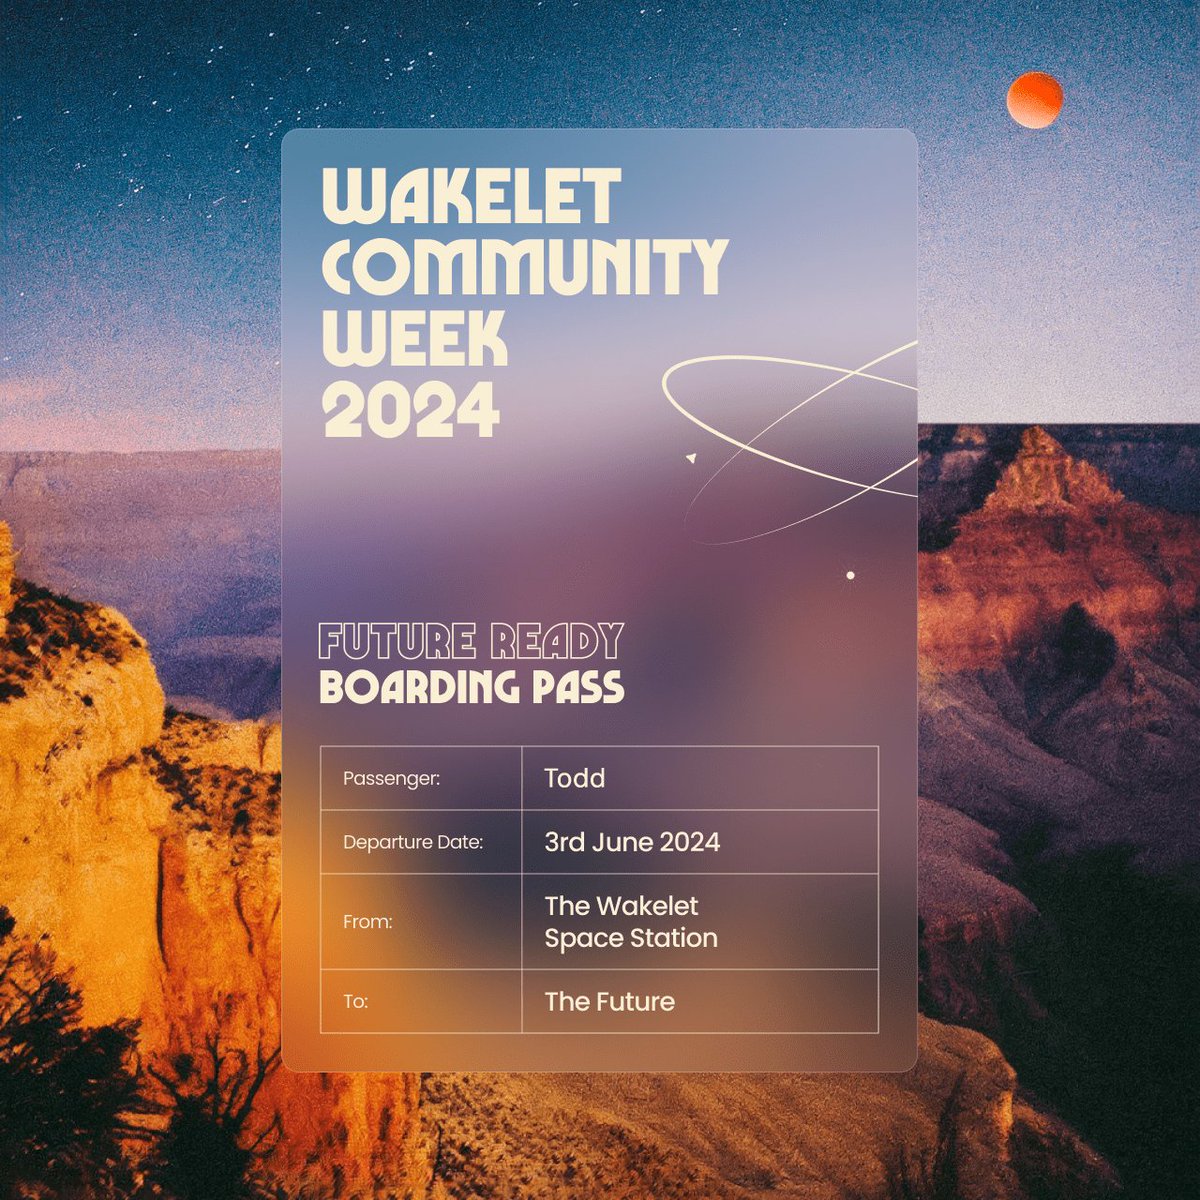 I've got my #WakeletCommunityWeek2024 Boarding Pass! 🚀 I'm ready to take to the sky and explore the Future of Education. Thanks for the idea @MisbahGedal Register for yours now: bit.ly/3vFs2tI @winnetka36